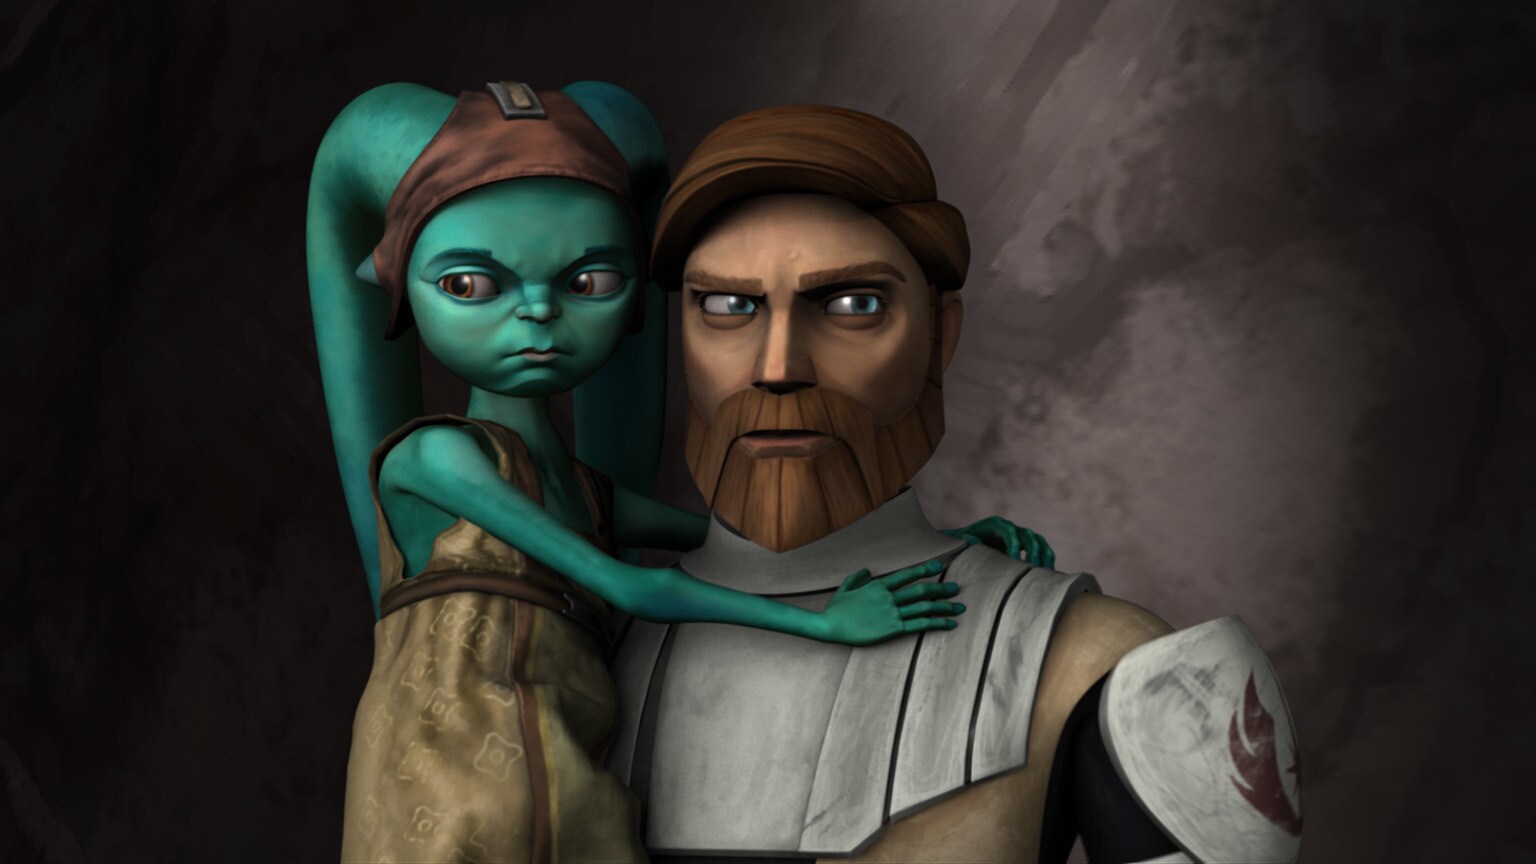 The Clone Wars Rewatch: The Faces of the "Innocents of Ryloth"